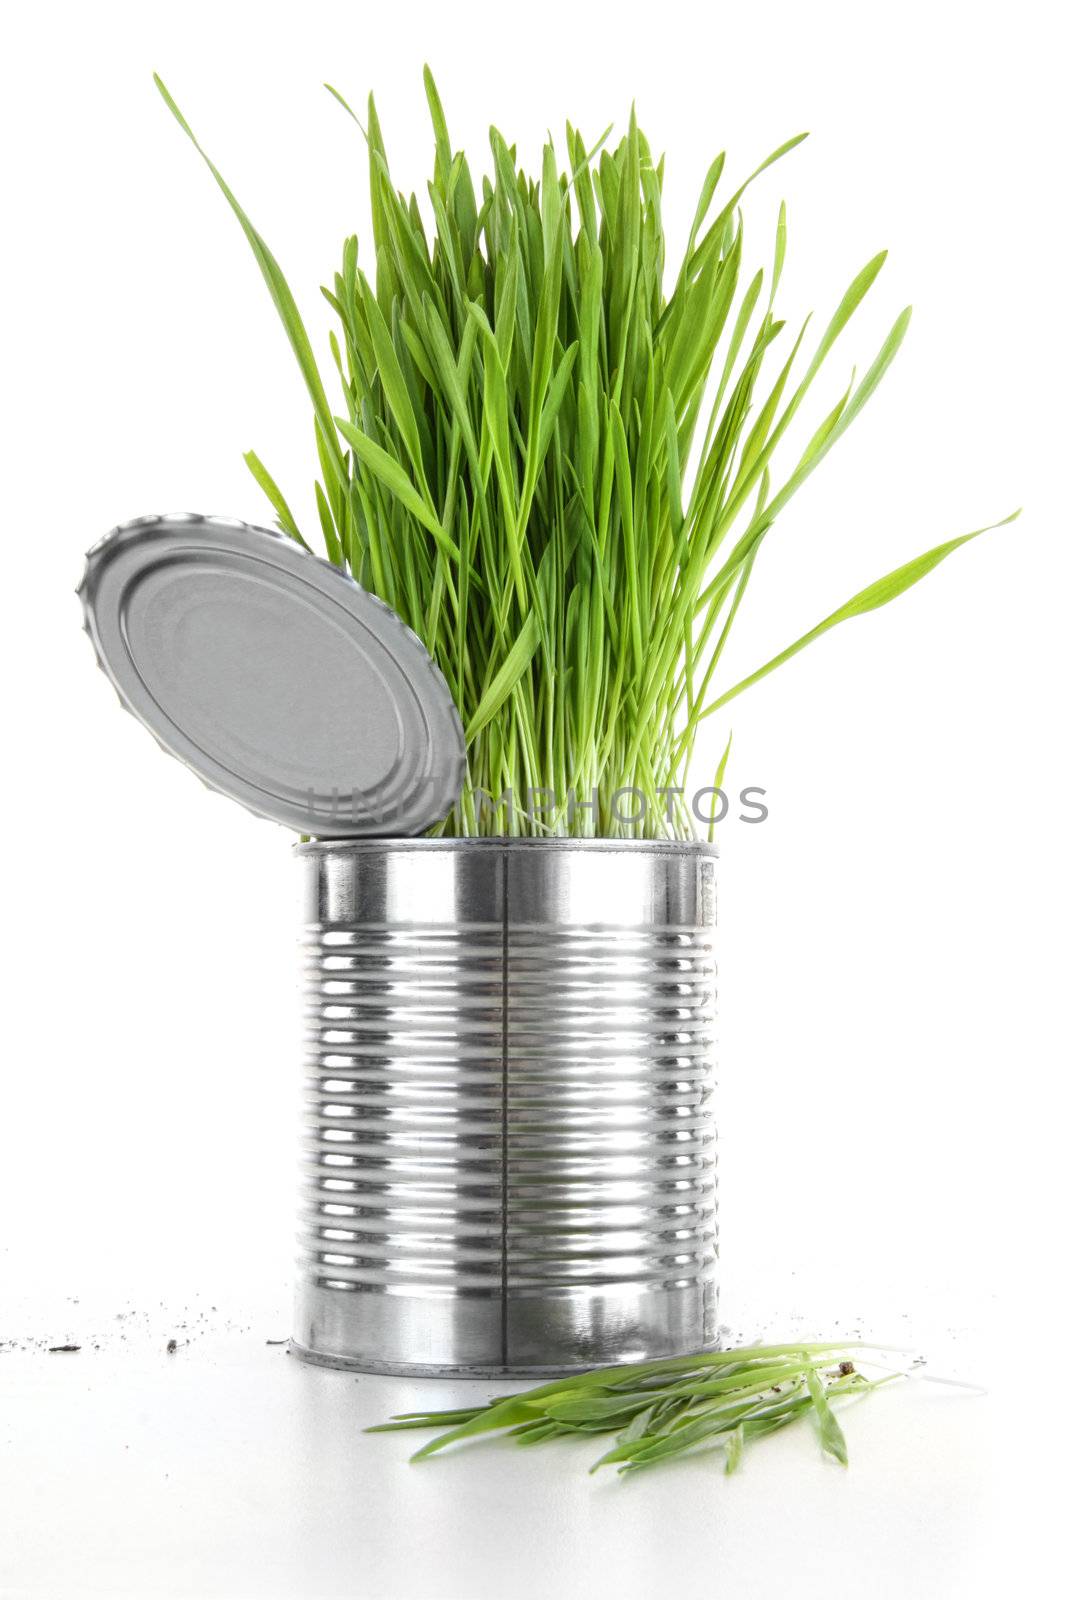 Closeup of wheatgrass in an aluminum can on white by Sandralise